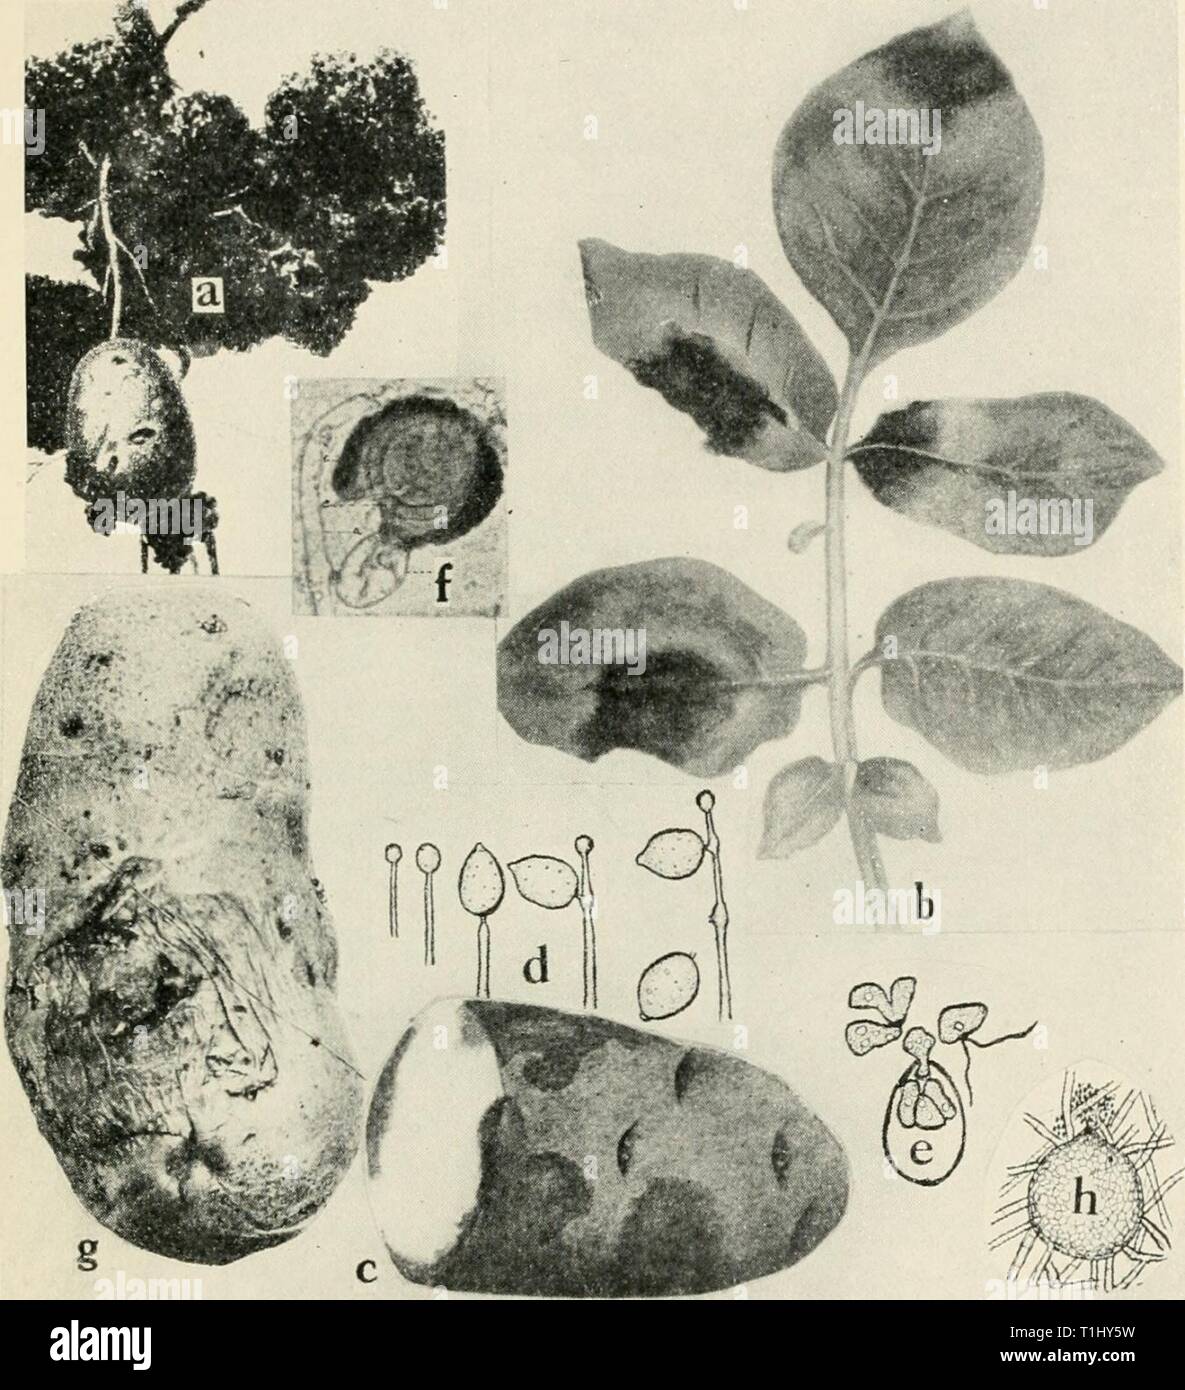 Diseases of truck crops and Diseases of truck crops and their control  diseasesoftruckc00taubuoft Year: [1918]  Fig. 6i. Potato Diseases. a. Black wart (after Gussow), b. late blight on foliage, c. late blight on tuber, d. successive stages of the development of the conidia of Phyiophthora infestans (b. and d. after L. R. Jones), e. germination of conidia of Phytophlhora infestayis, bv means of zoopores (after Ward),/, mature oogonium of P. infestans (after Clinton)'. R. melters. surface view, early stage of infection, h. pycnidium of Phoma tuberose (after Melhus and Rosenbaum). Stock Photo